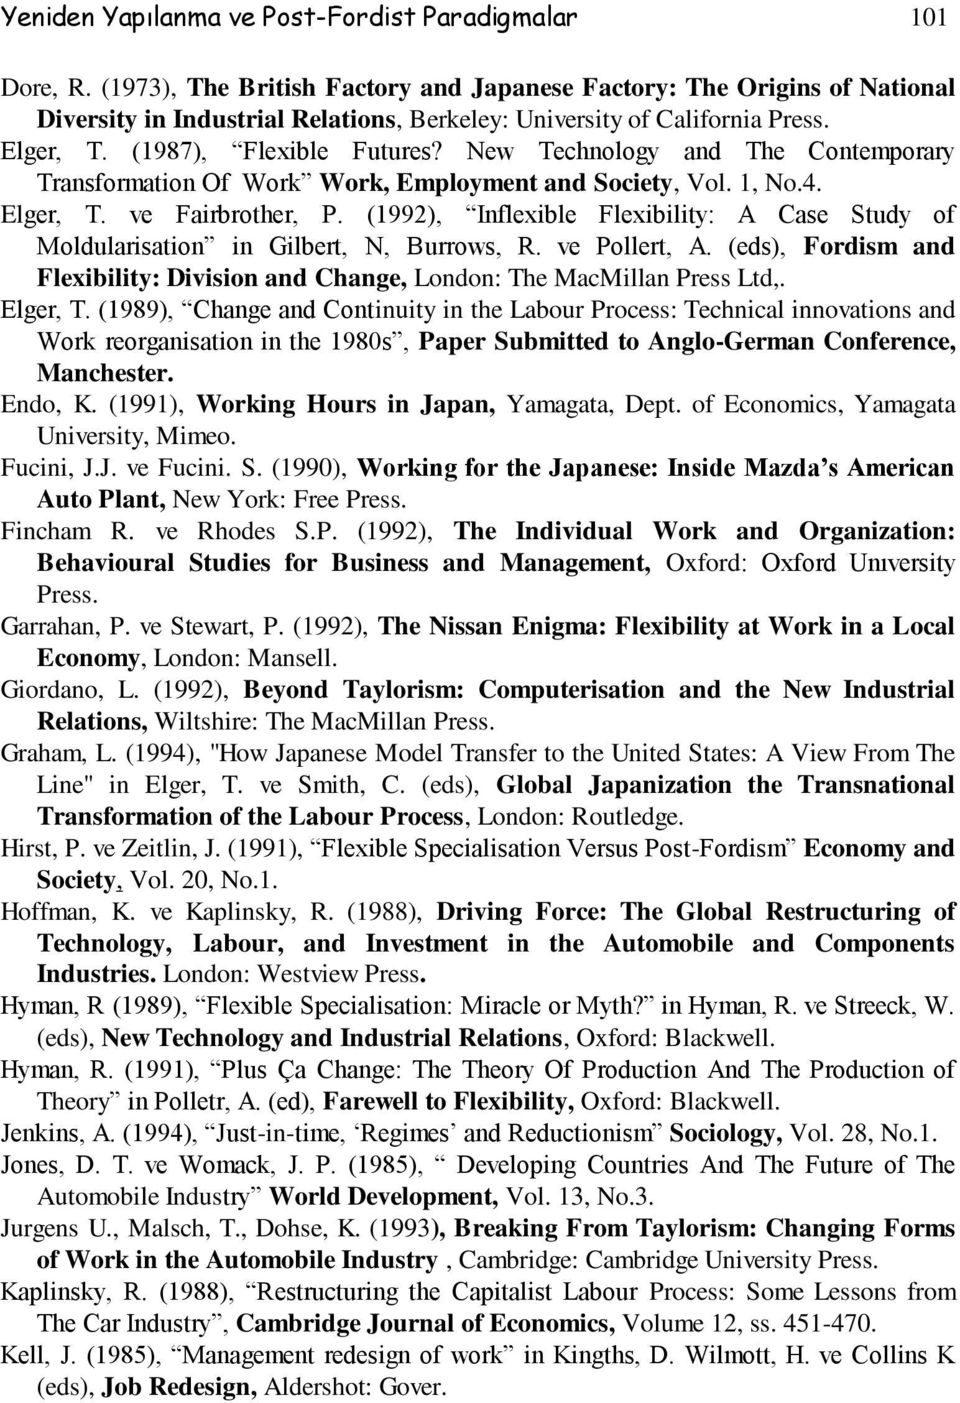 New Technology and The Contemporary Transformation Of Work Work, Employment and Society, Vol. 1, No.4. Elger, T. ve Fairbrother, P.